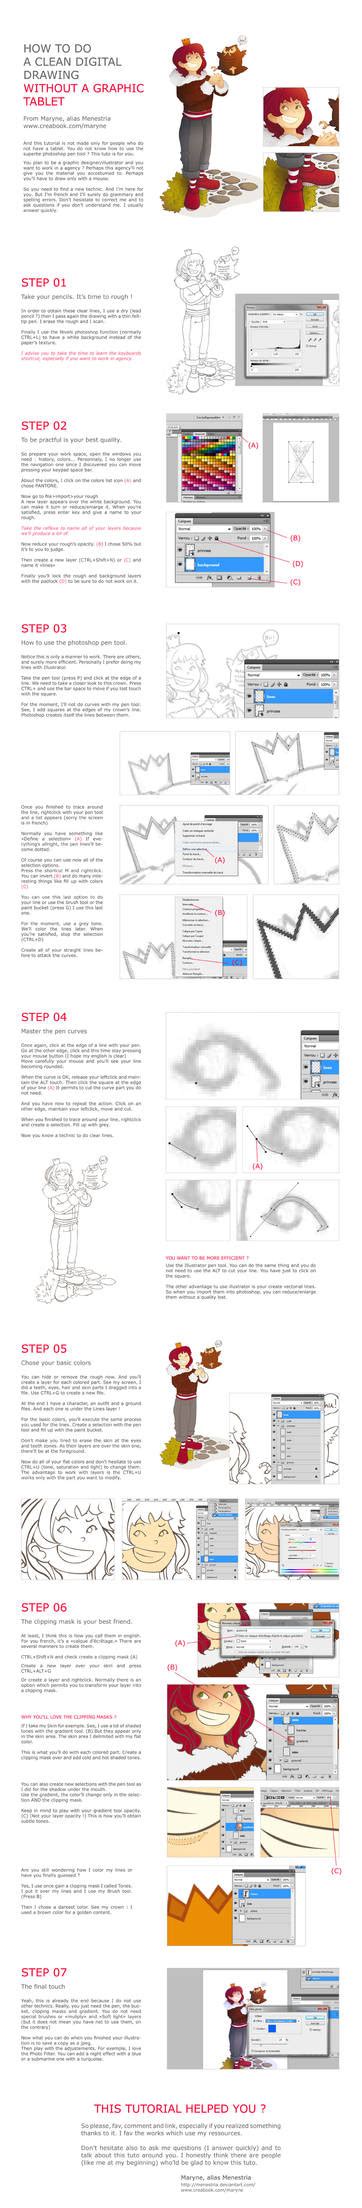 Tutorial, How to draw without a graphic tablet by Menestria on DeviantArt